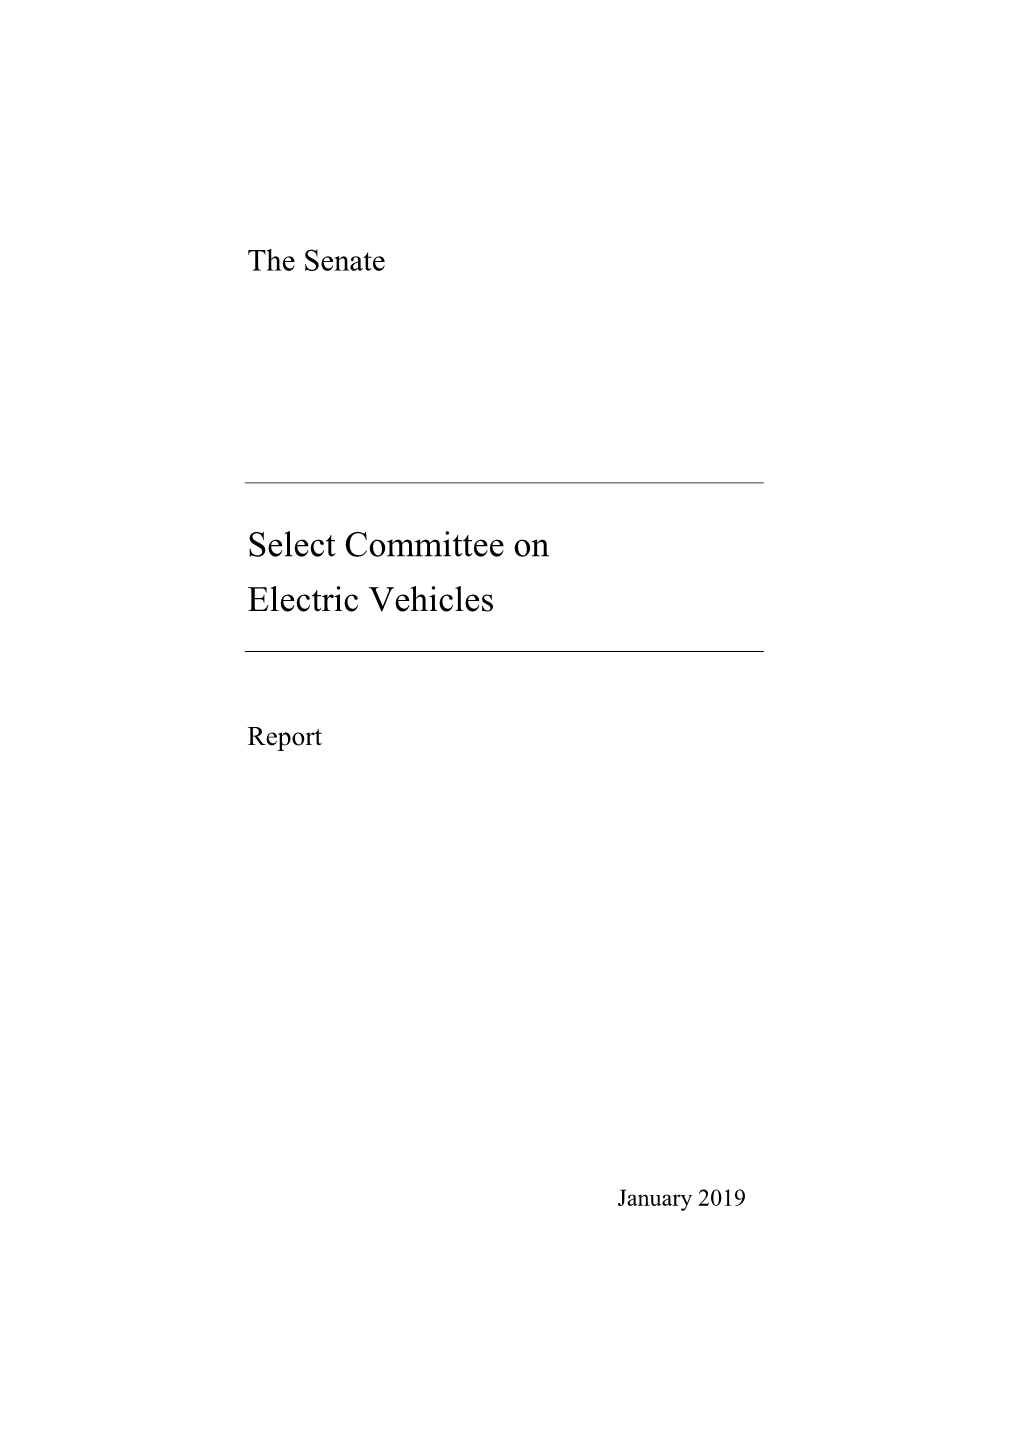 Senate Select Committee on Electric Vehicles